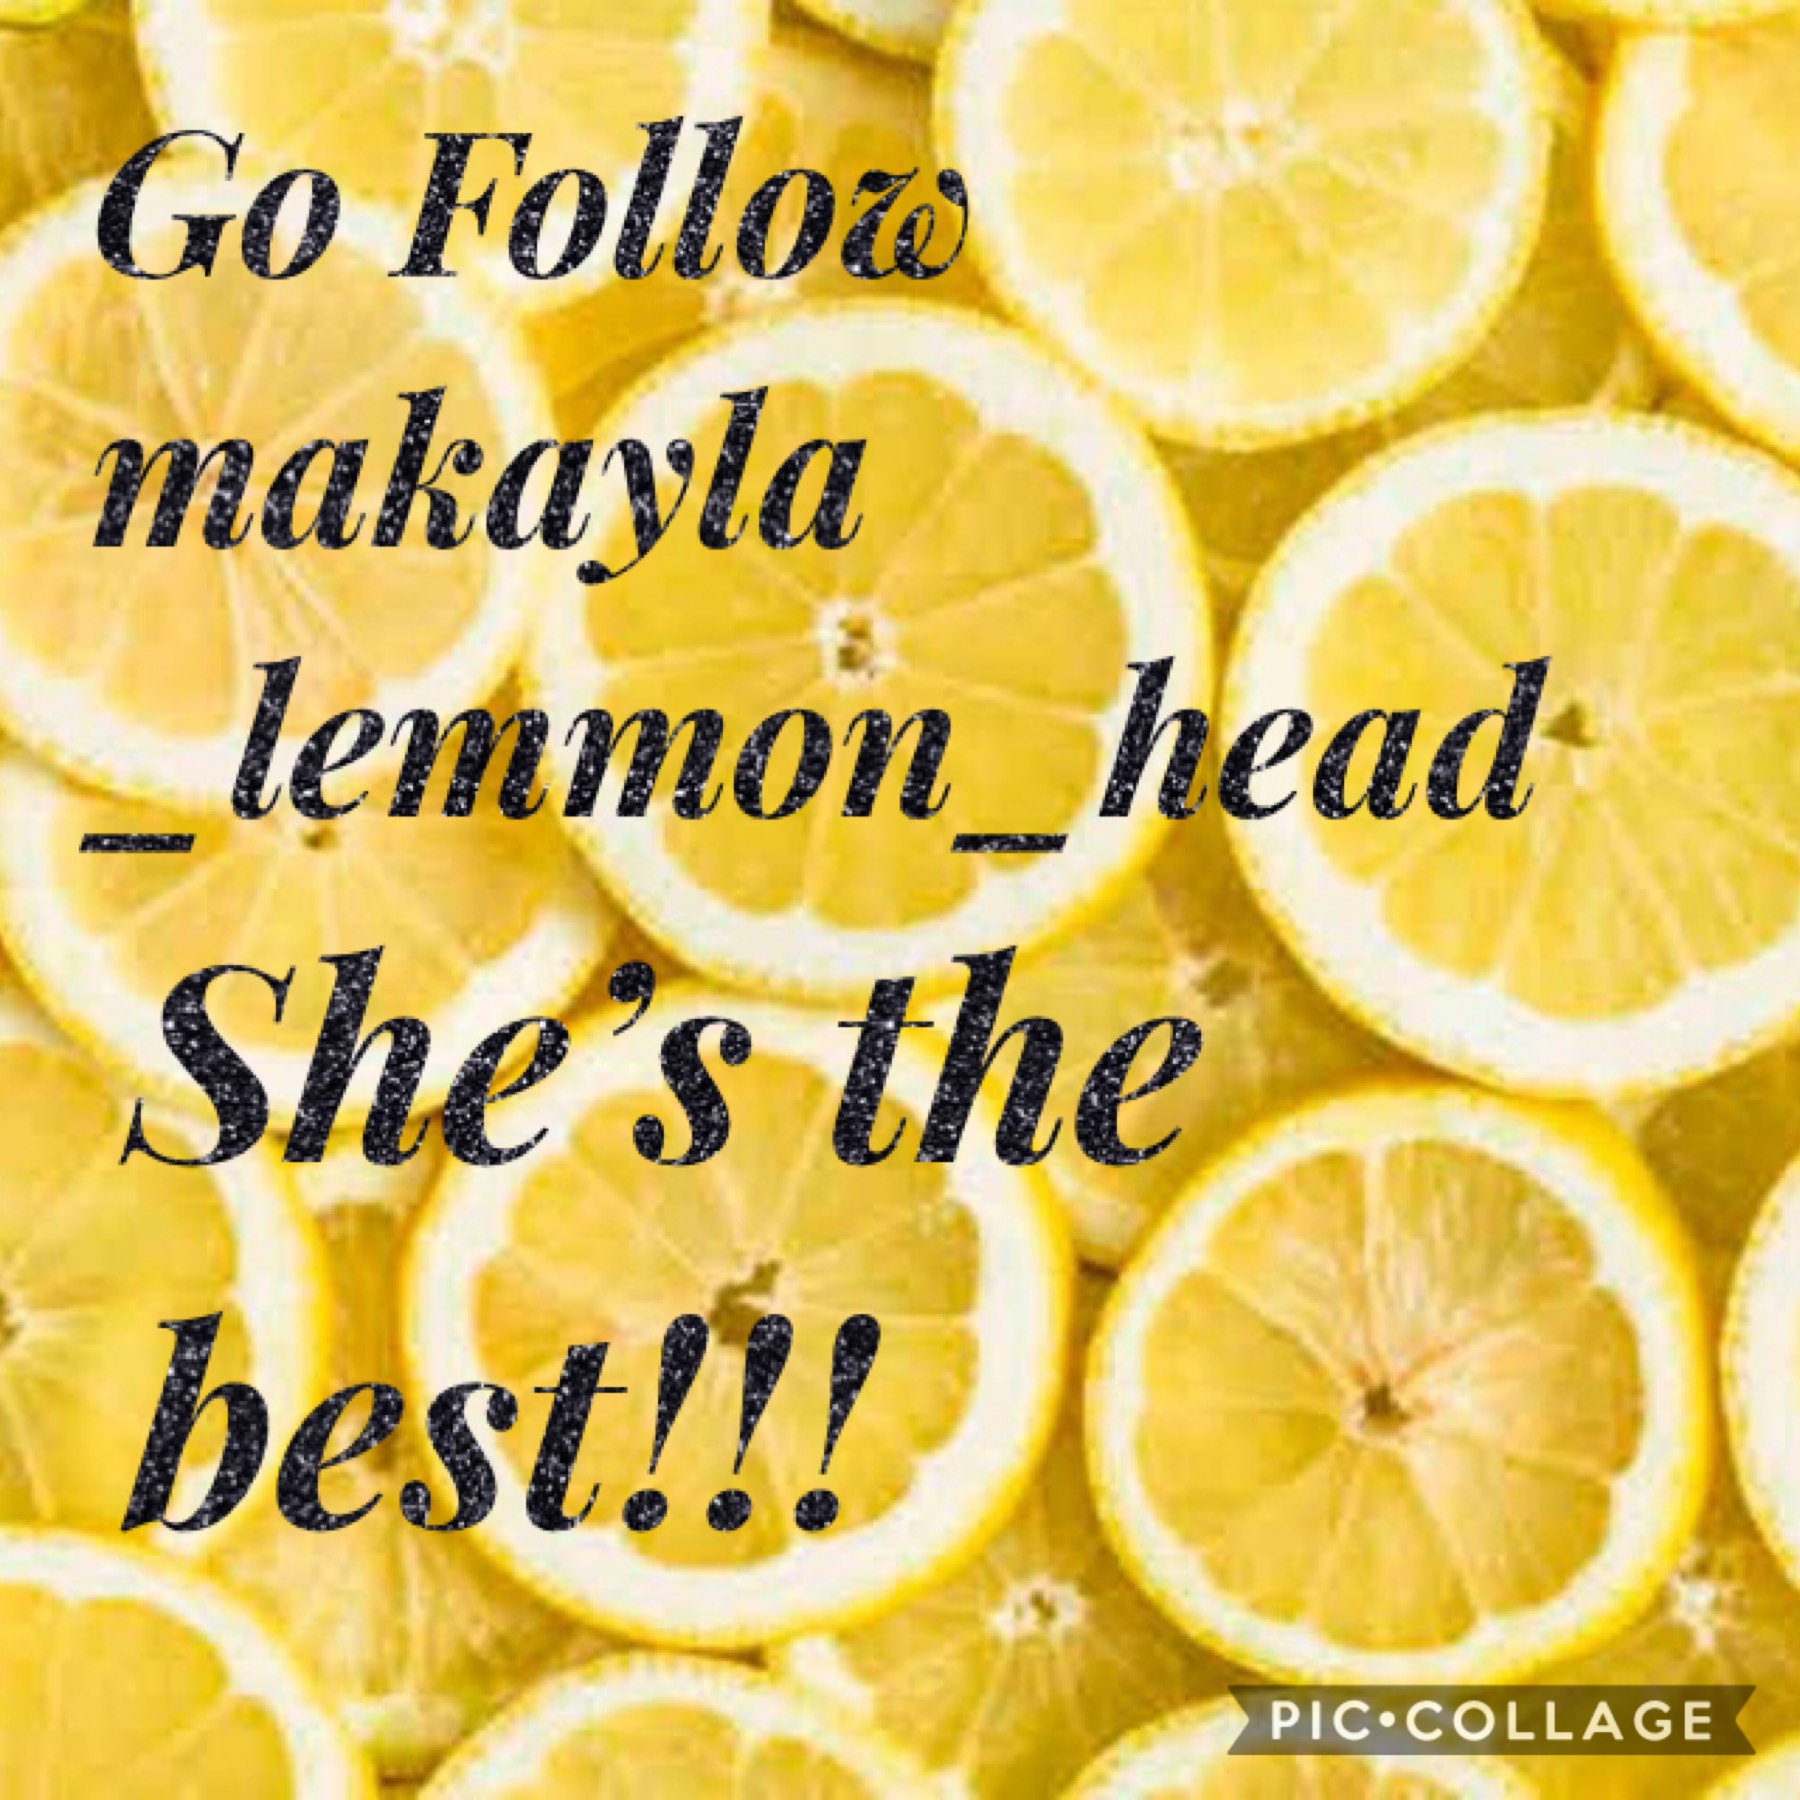 Make sure you follow her!!